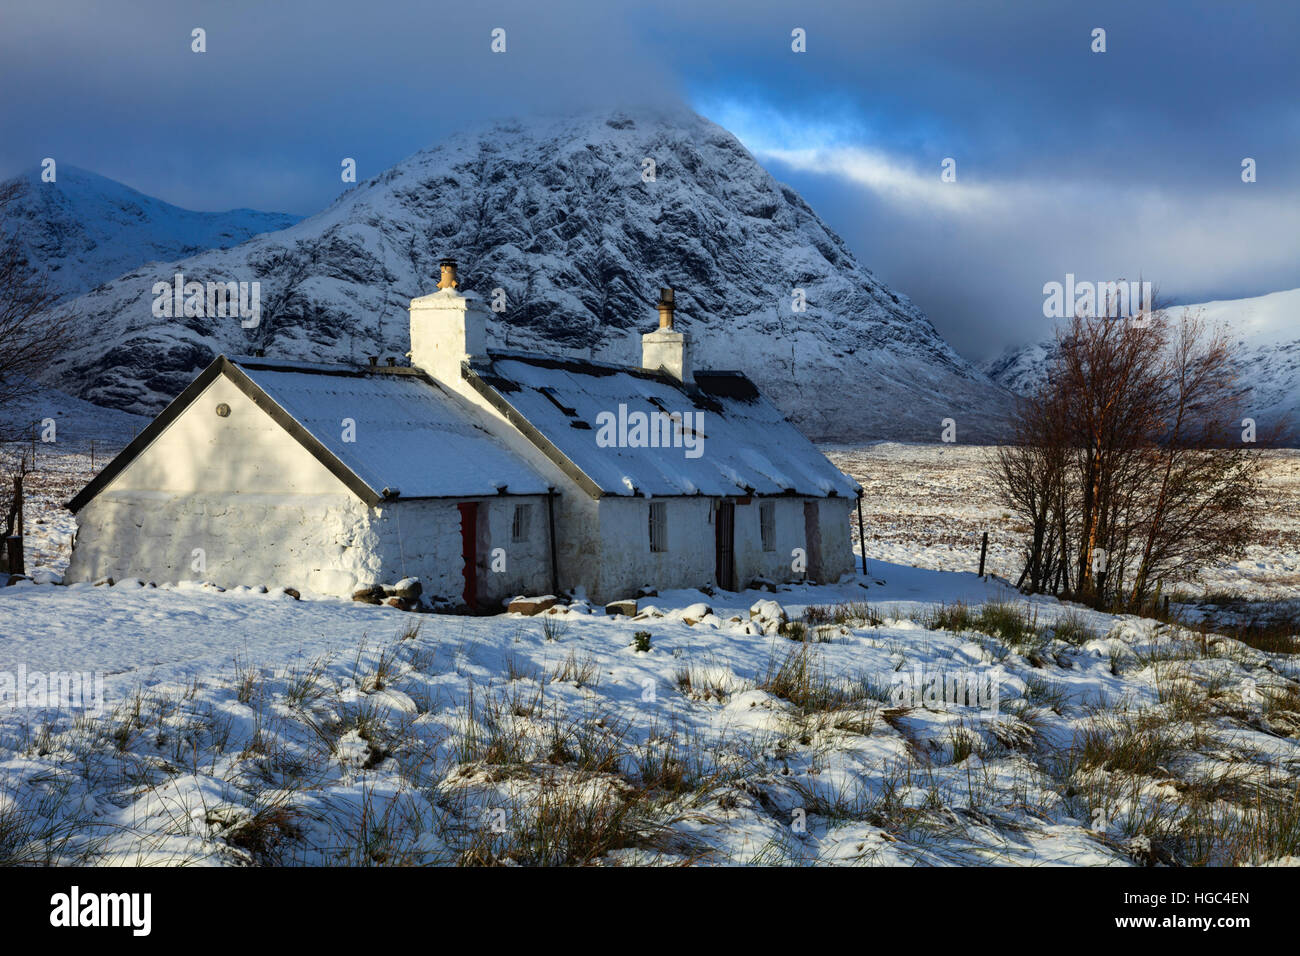 Snow at Black Rock Cottage on Rannoch Moor in the Scottish Highlands. Stock Photo